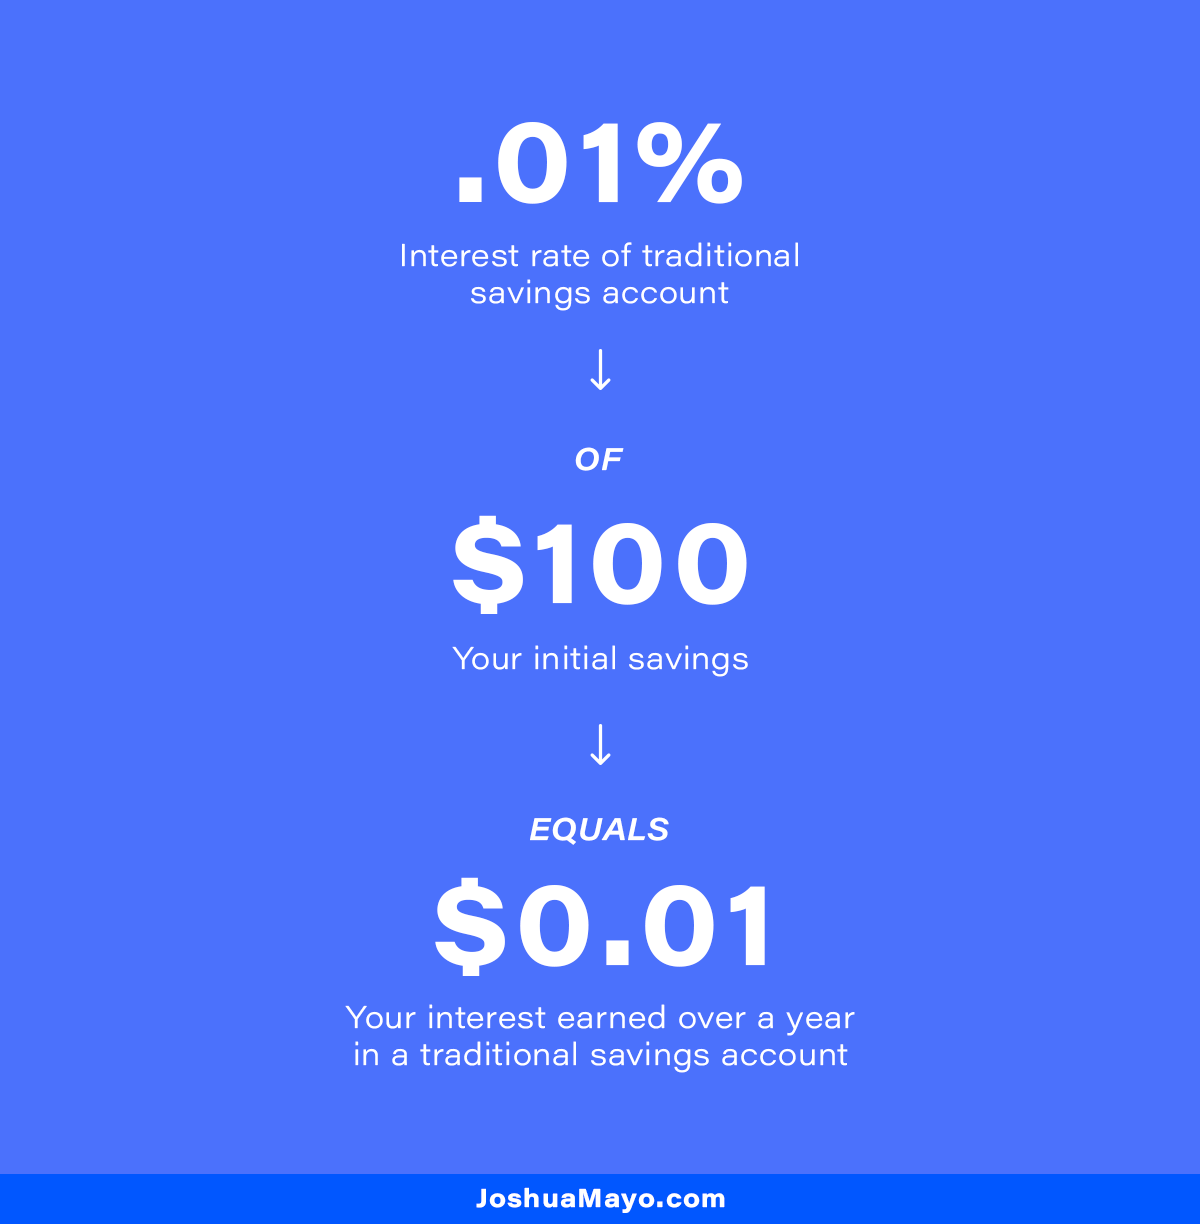 .01% interest means that if you had $100 in savings, after one year of your $100 sitting, you would only have earned $0.01.